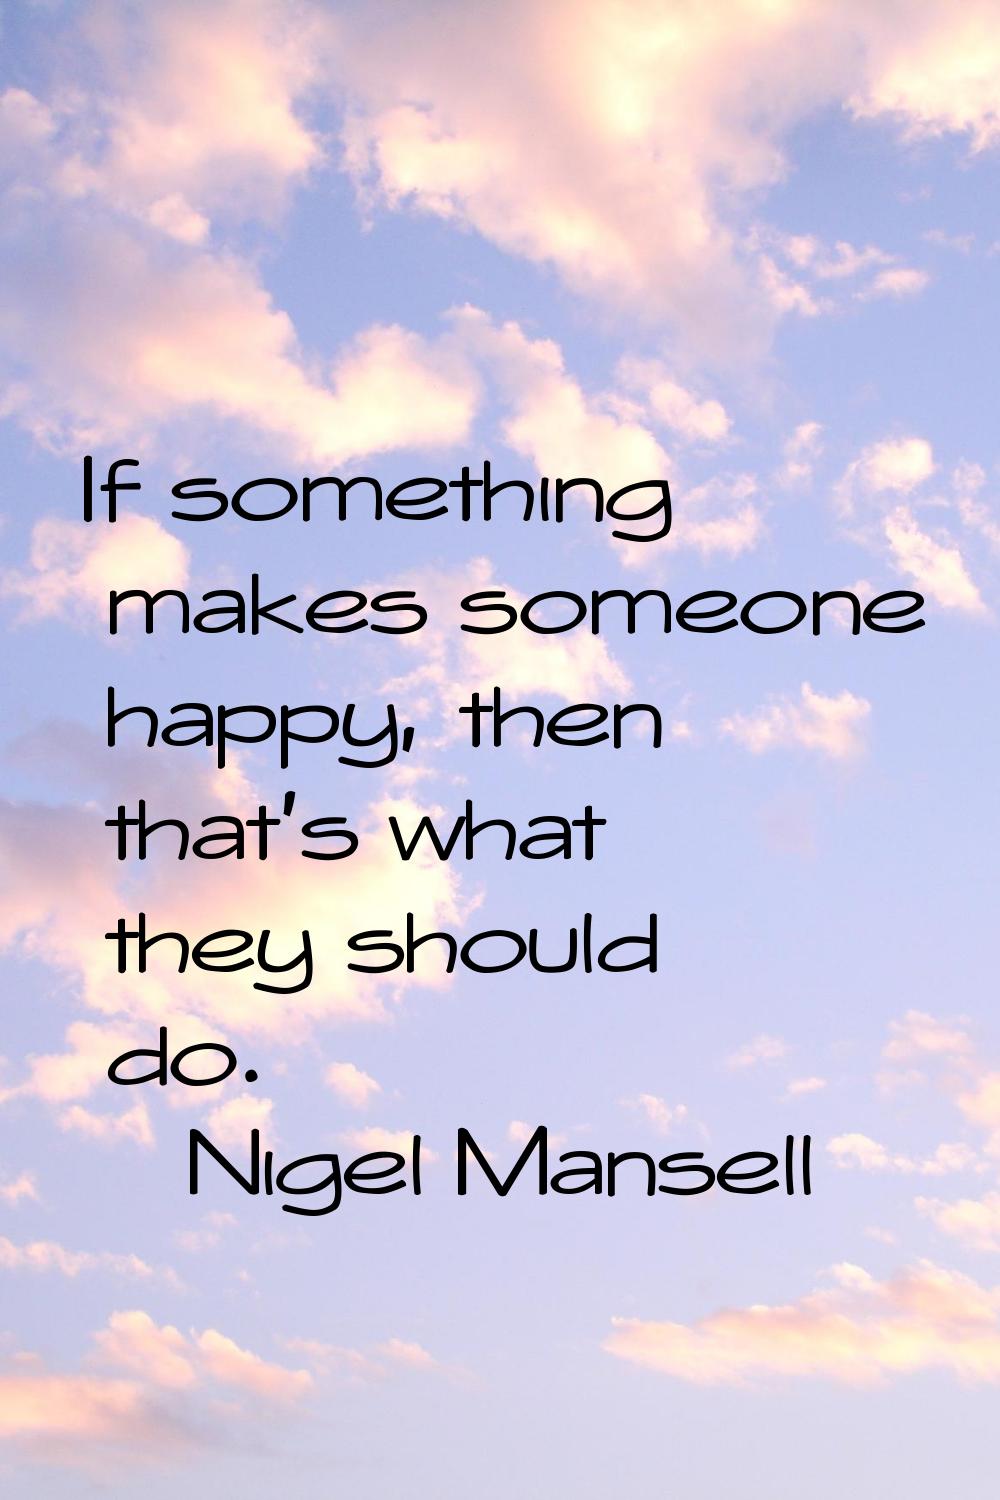 If something makes someone happy, then that's what they should do.